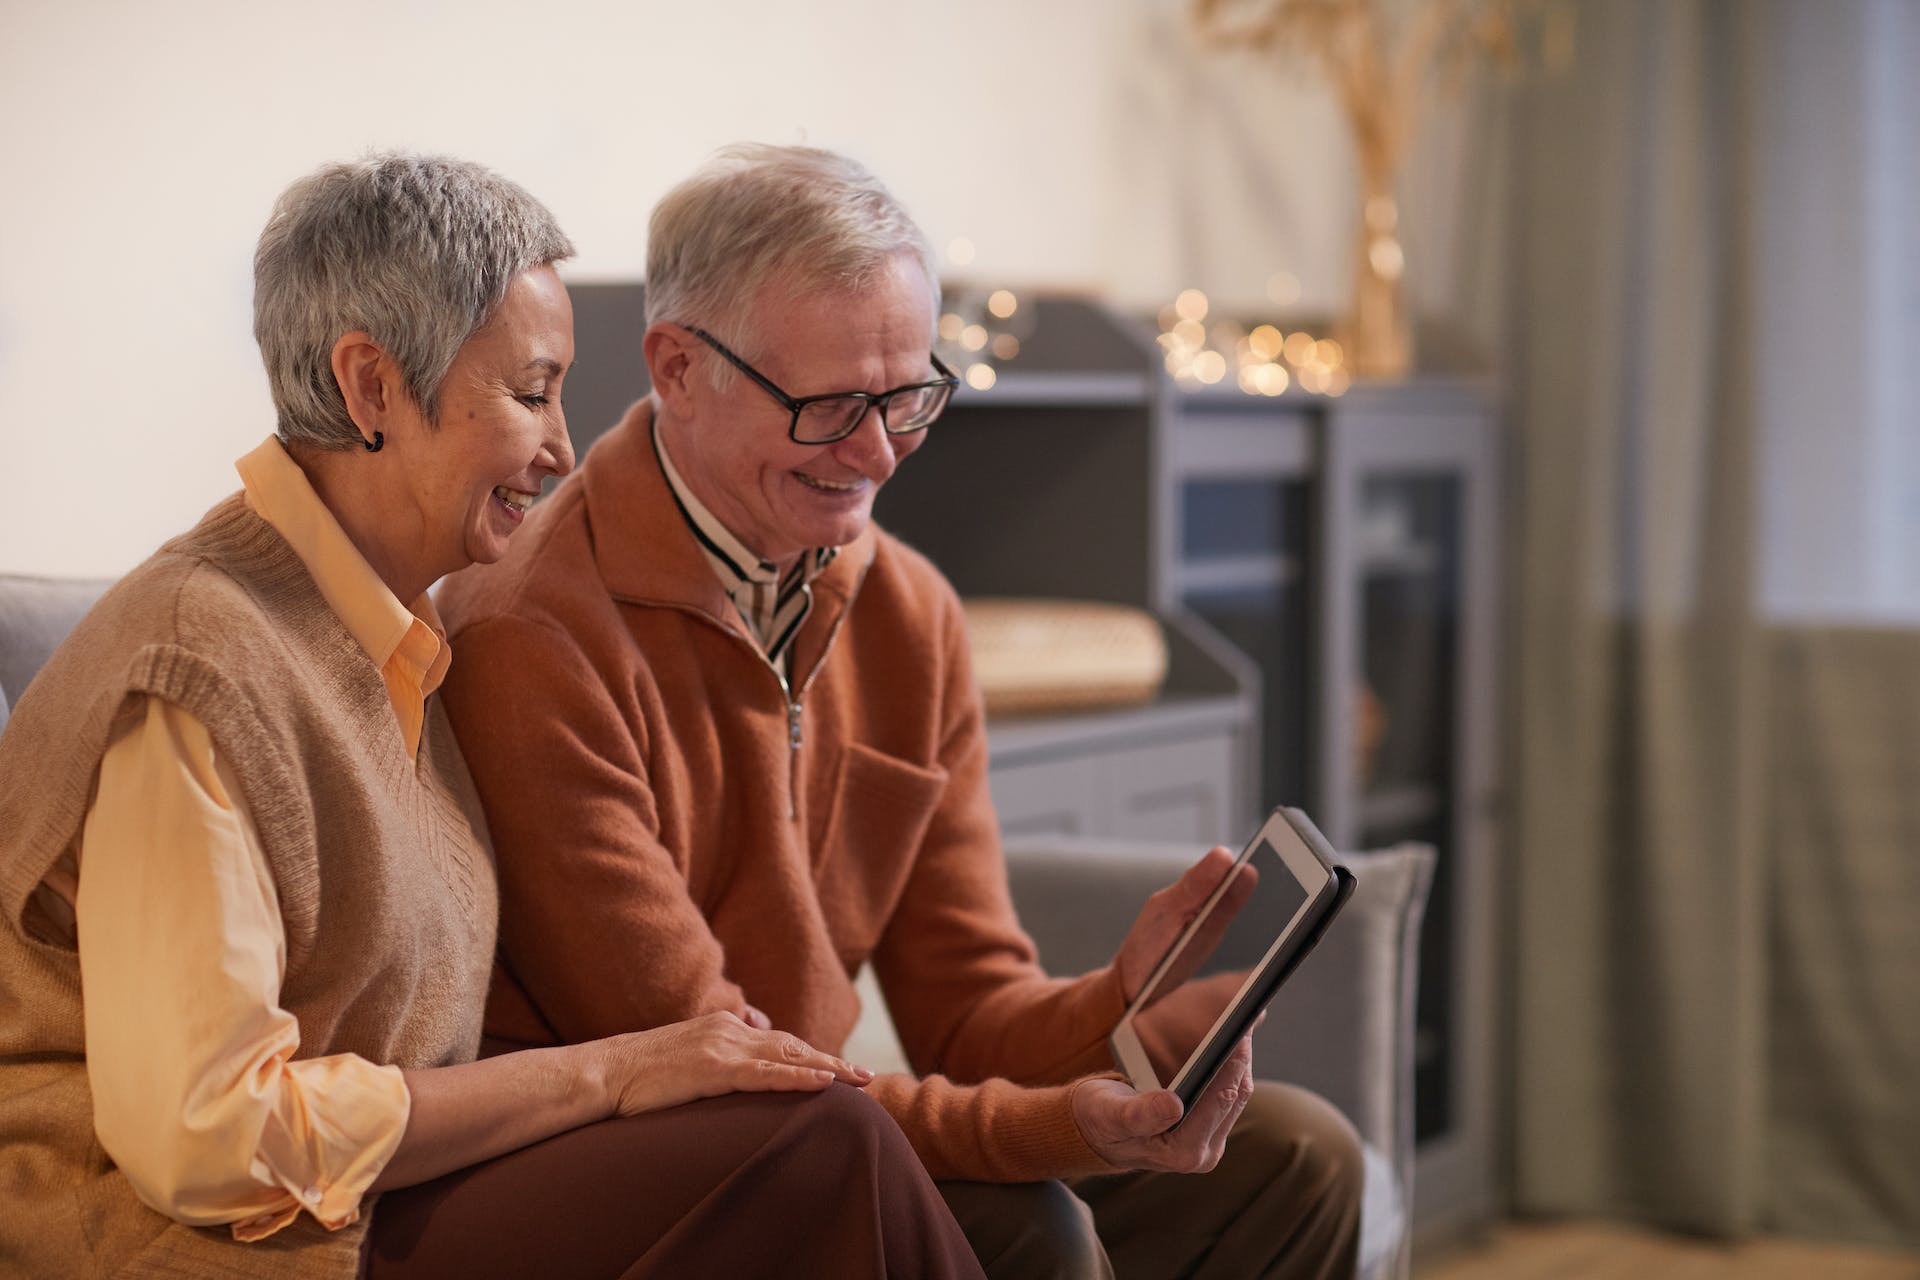 7 Sources of Low Cost Internet for Seniors – DailyCaring